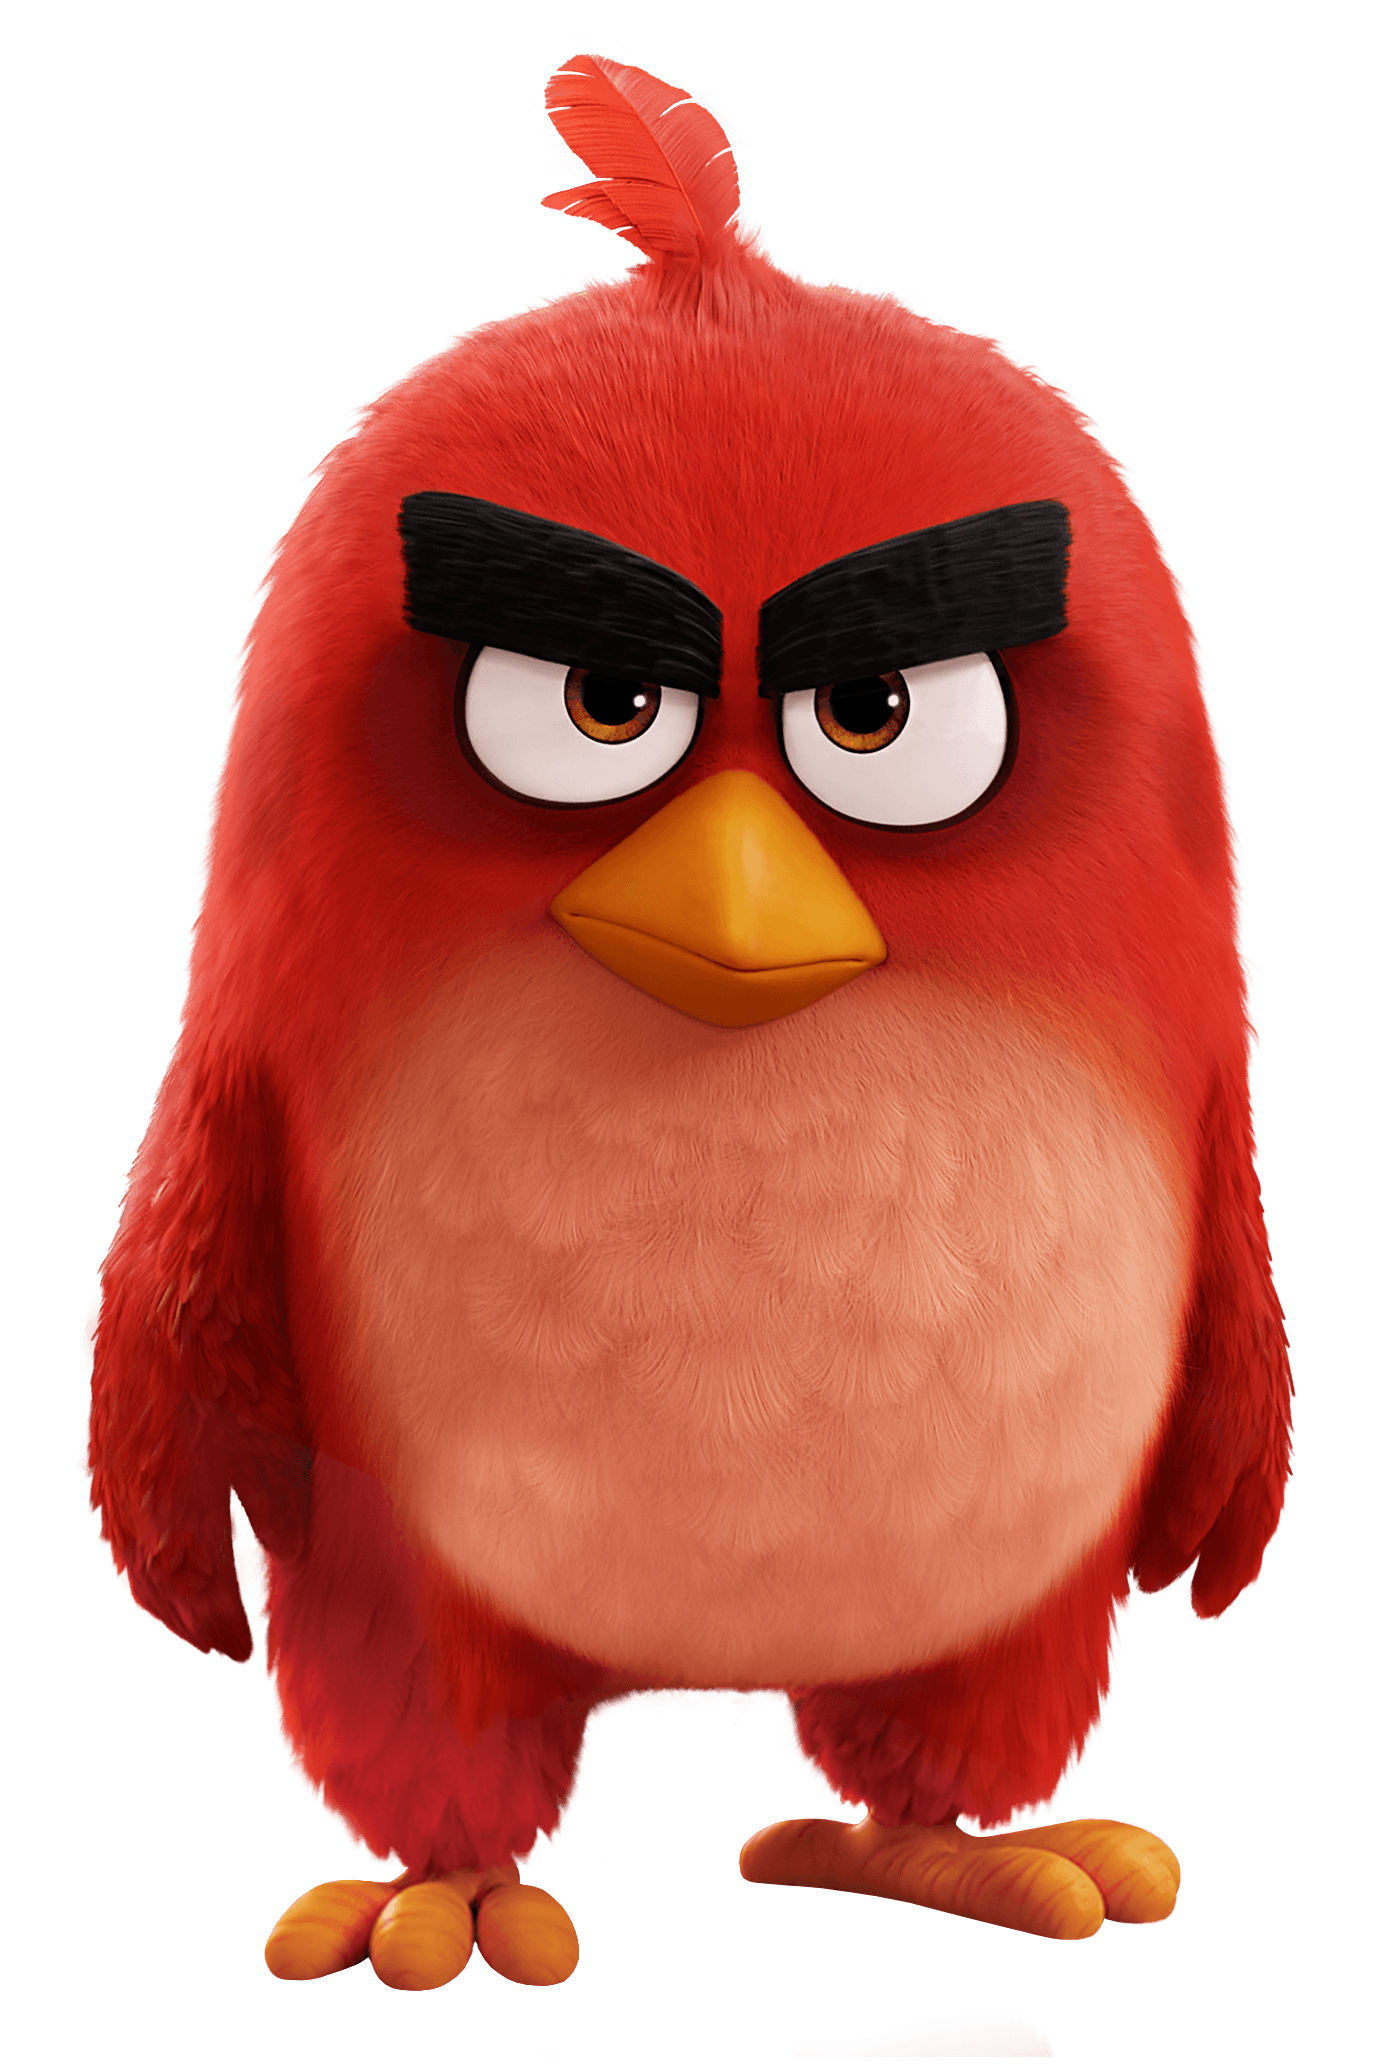 Angry Birds Red Logo - Red | Pachirapong chaiyadech Productions Wikia | FANDOM powered by Wikia